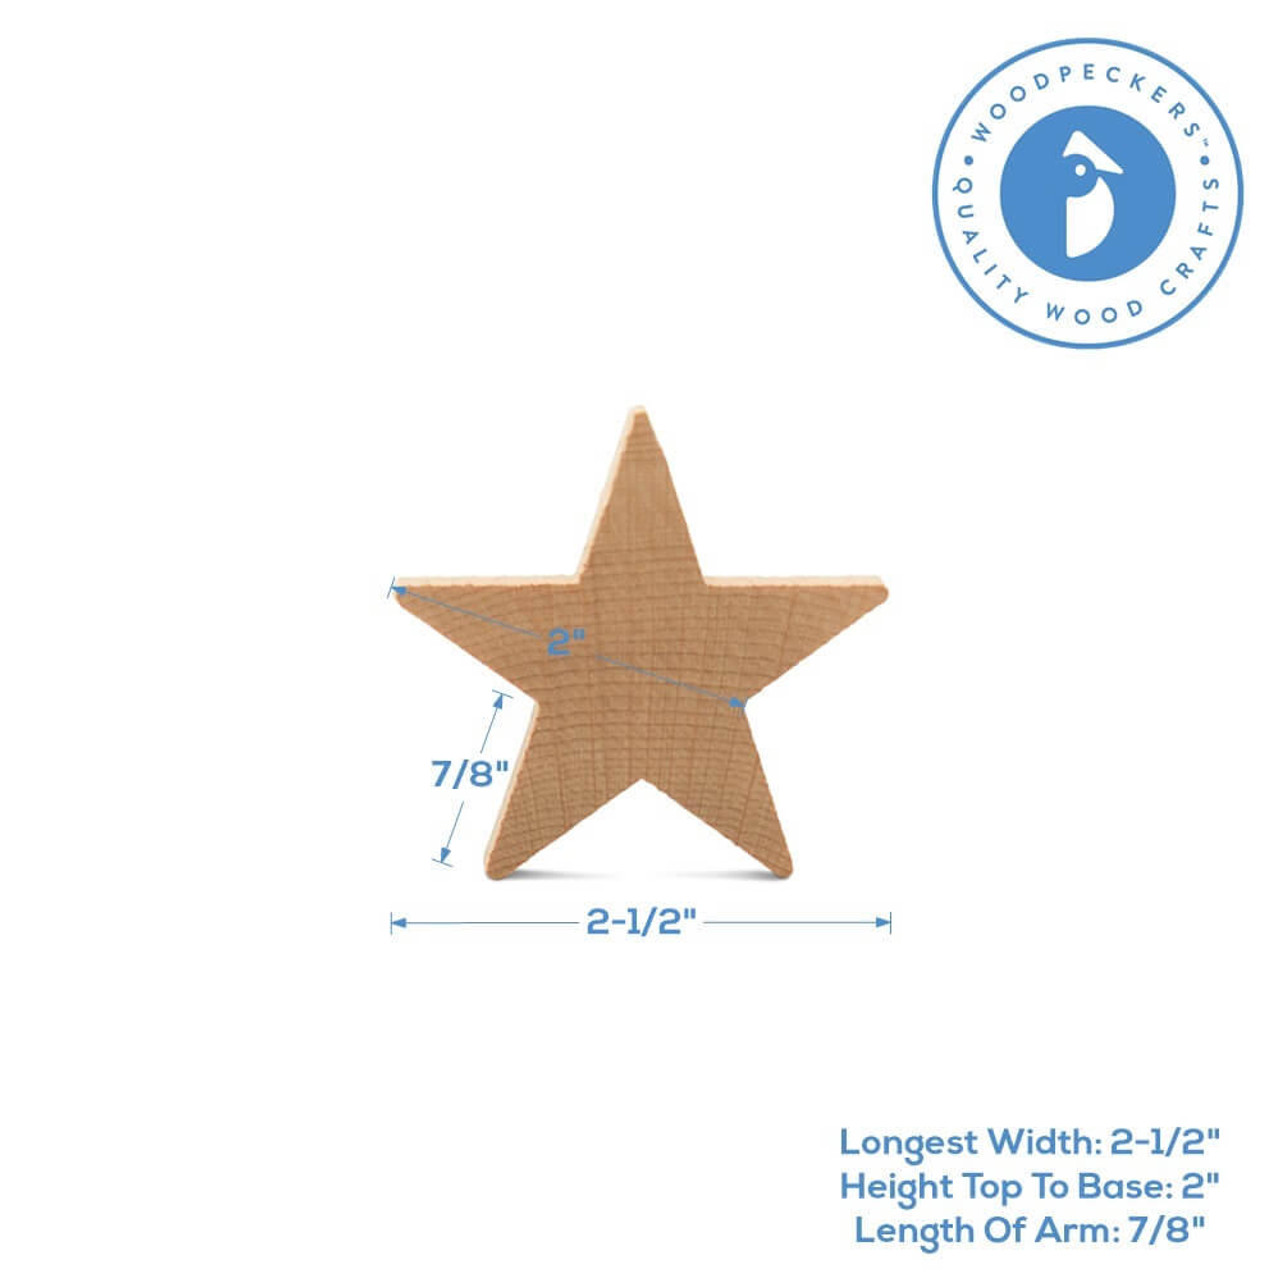 Unfinished Wood Stars for Crafts (2 in, 50 Pack) – BrightCreationsOfficial